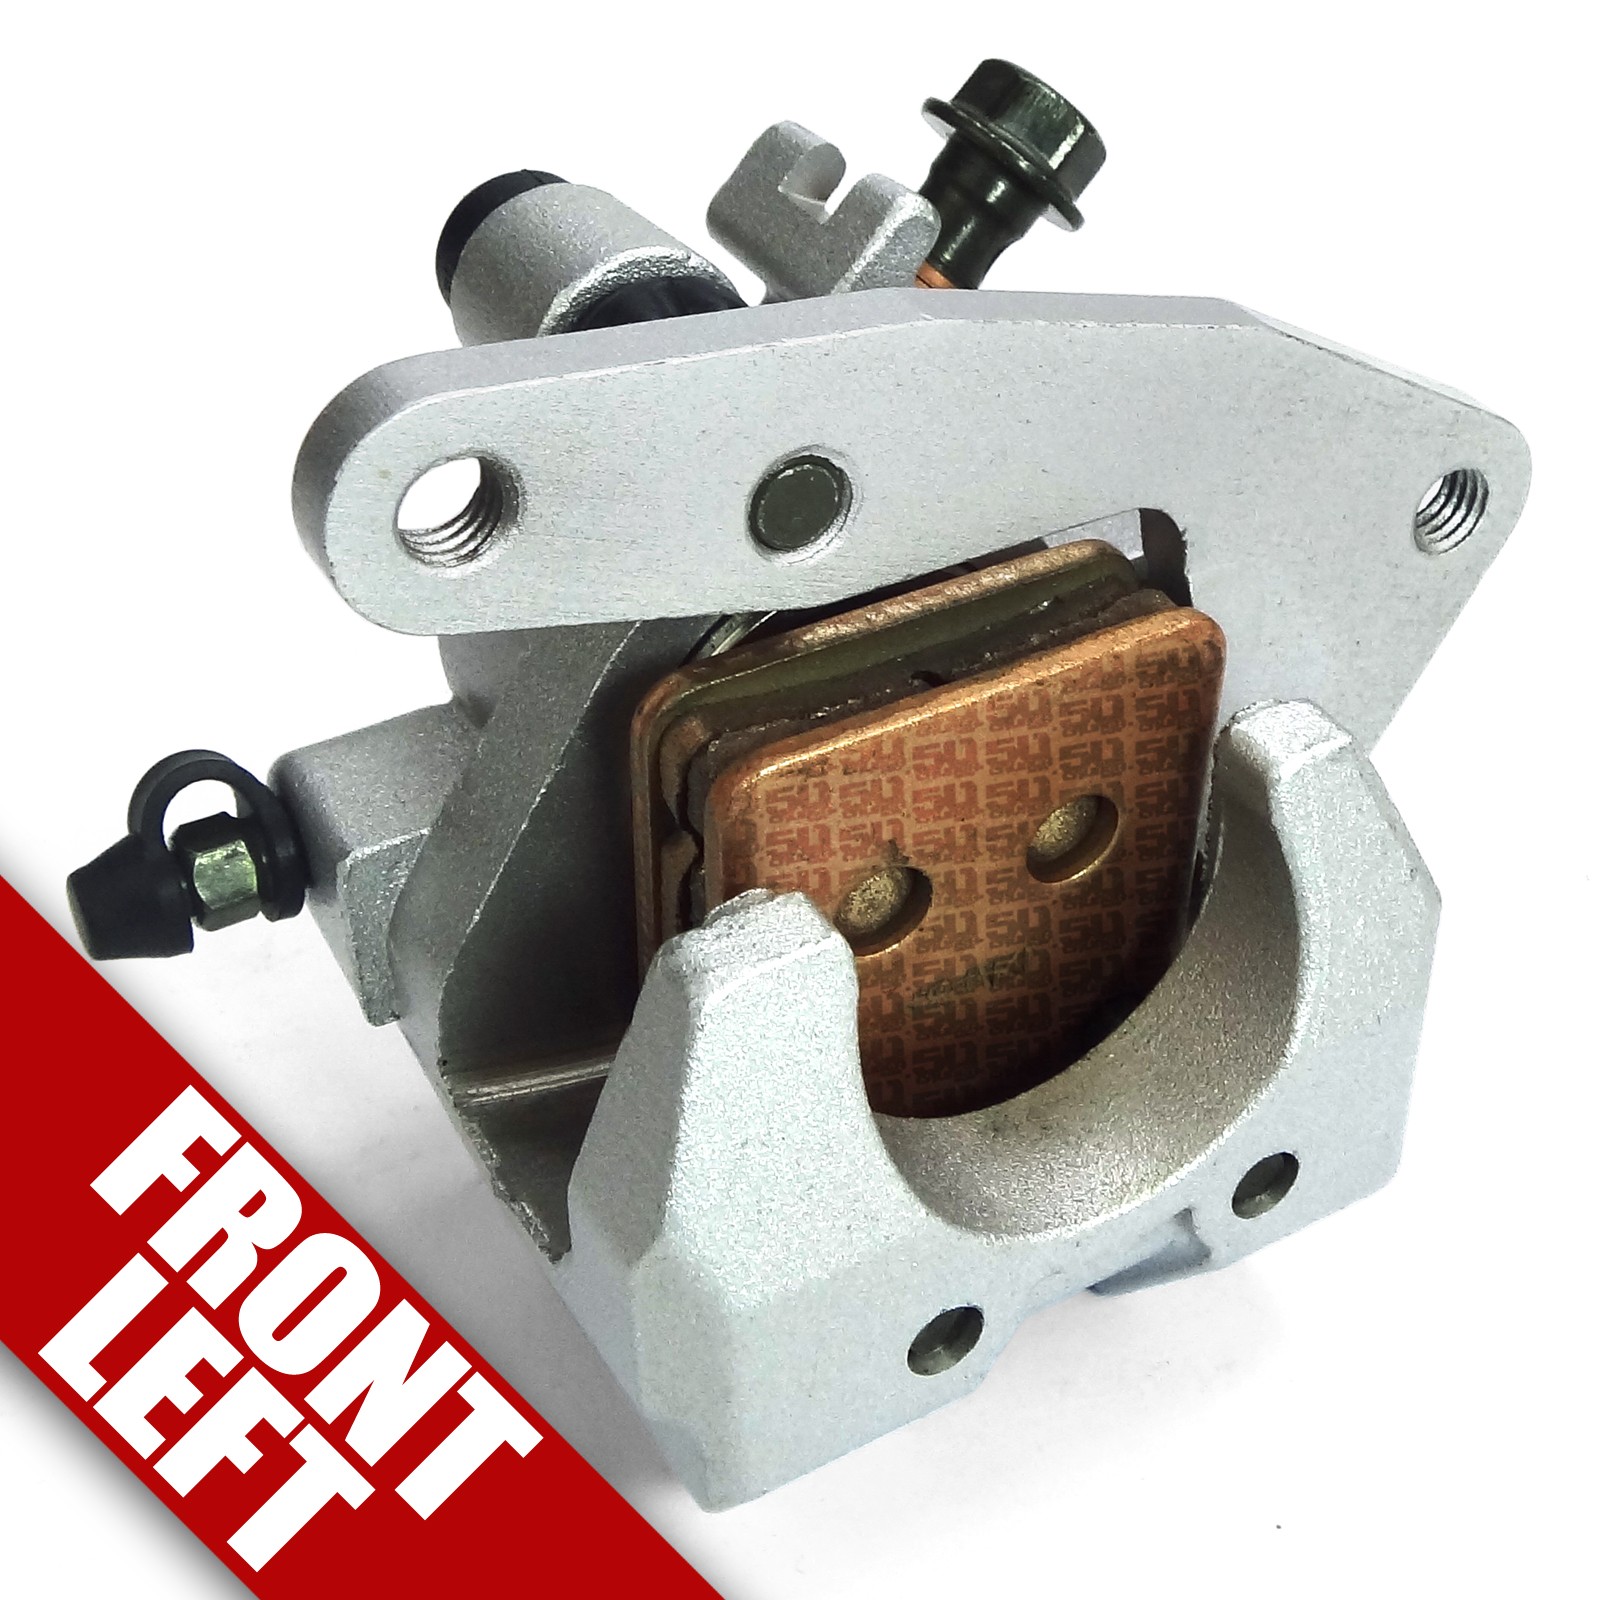 Details about   1 New Front Brake Caliper Set Fits YAMAHA GRIZZLY 660 2002-2008 YFM660 WITH PADS